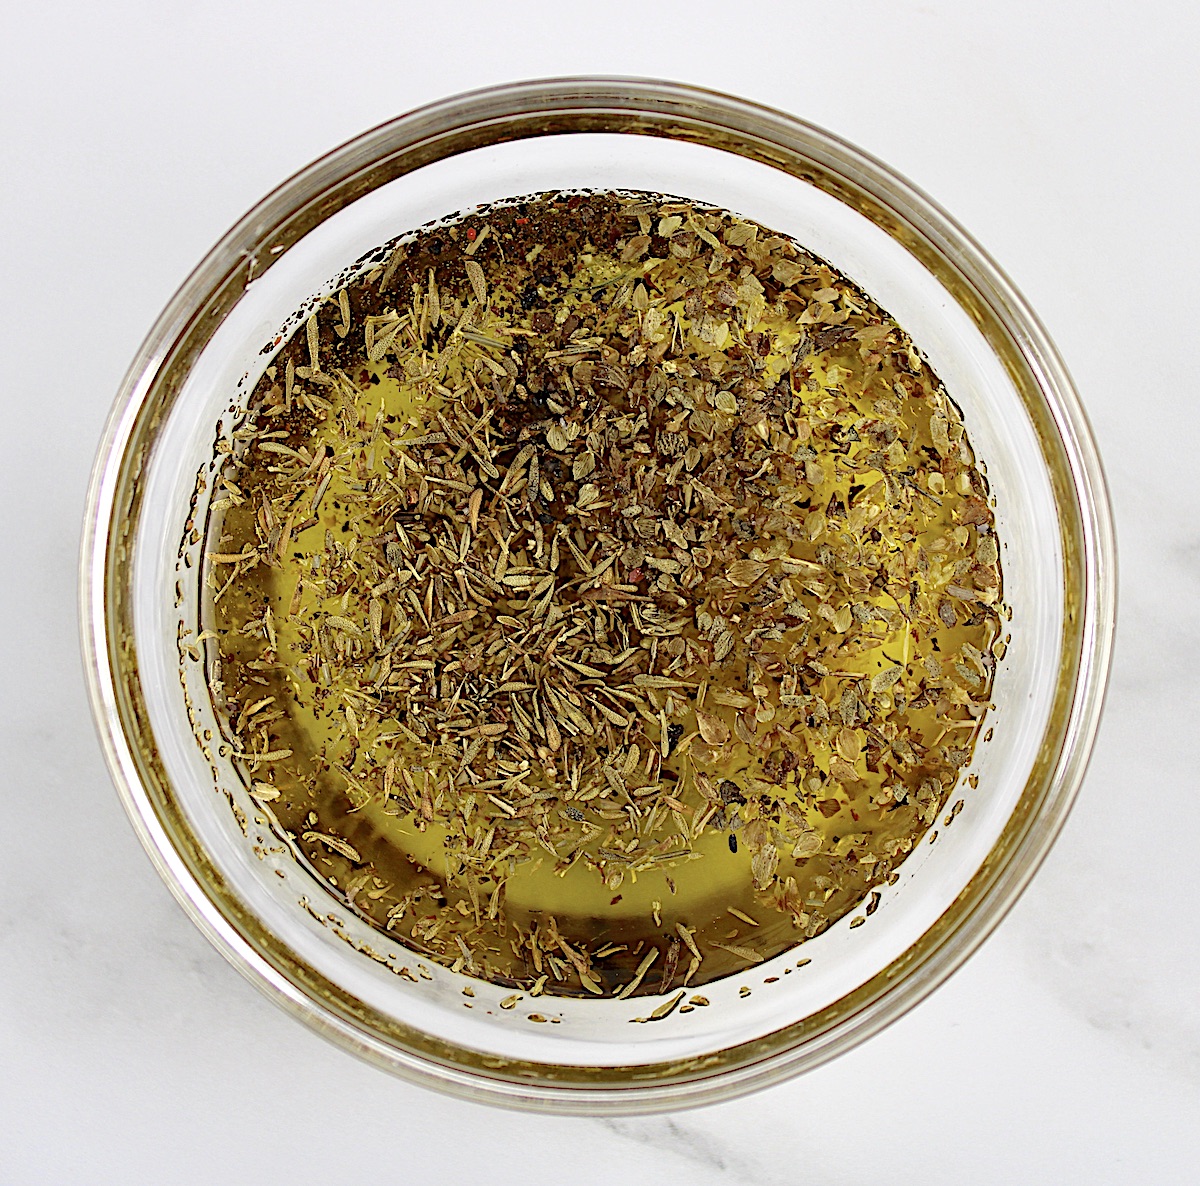 dried herbs and olive oil in glass bowl